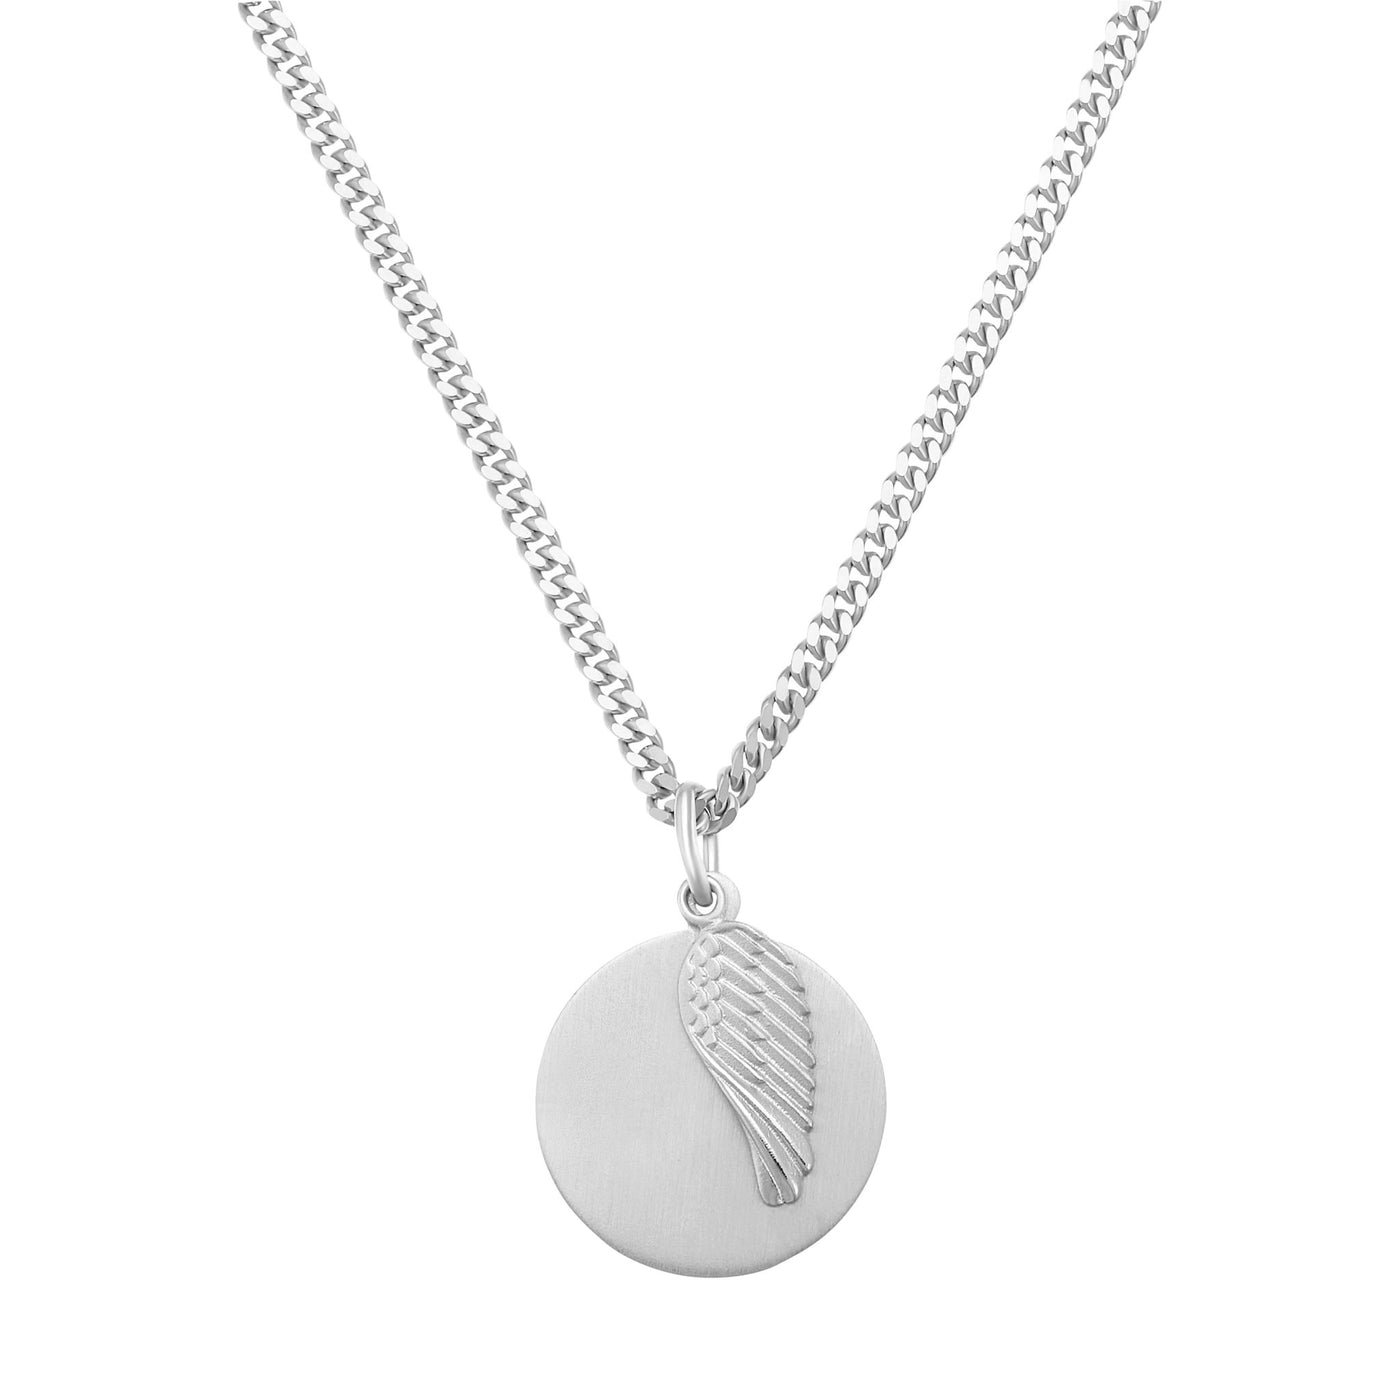 WING ENGRAVING PLATE NECKLACE 925 SILVER RHODIUM PLATED - IDENTIM®